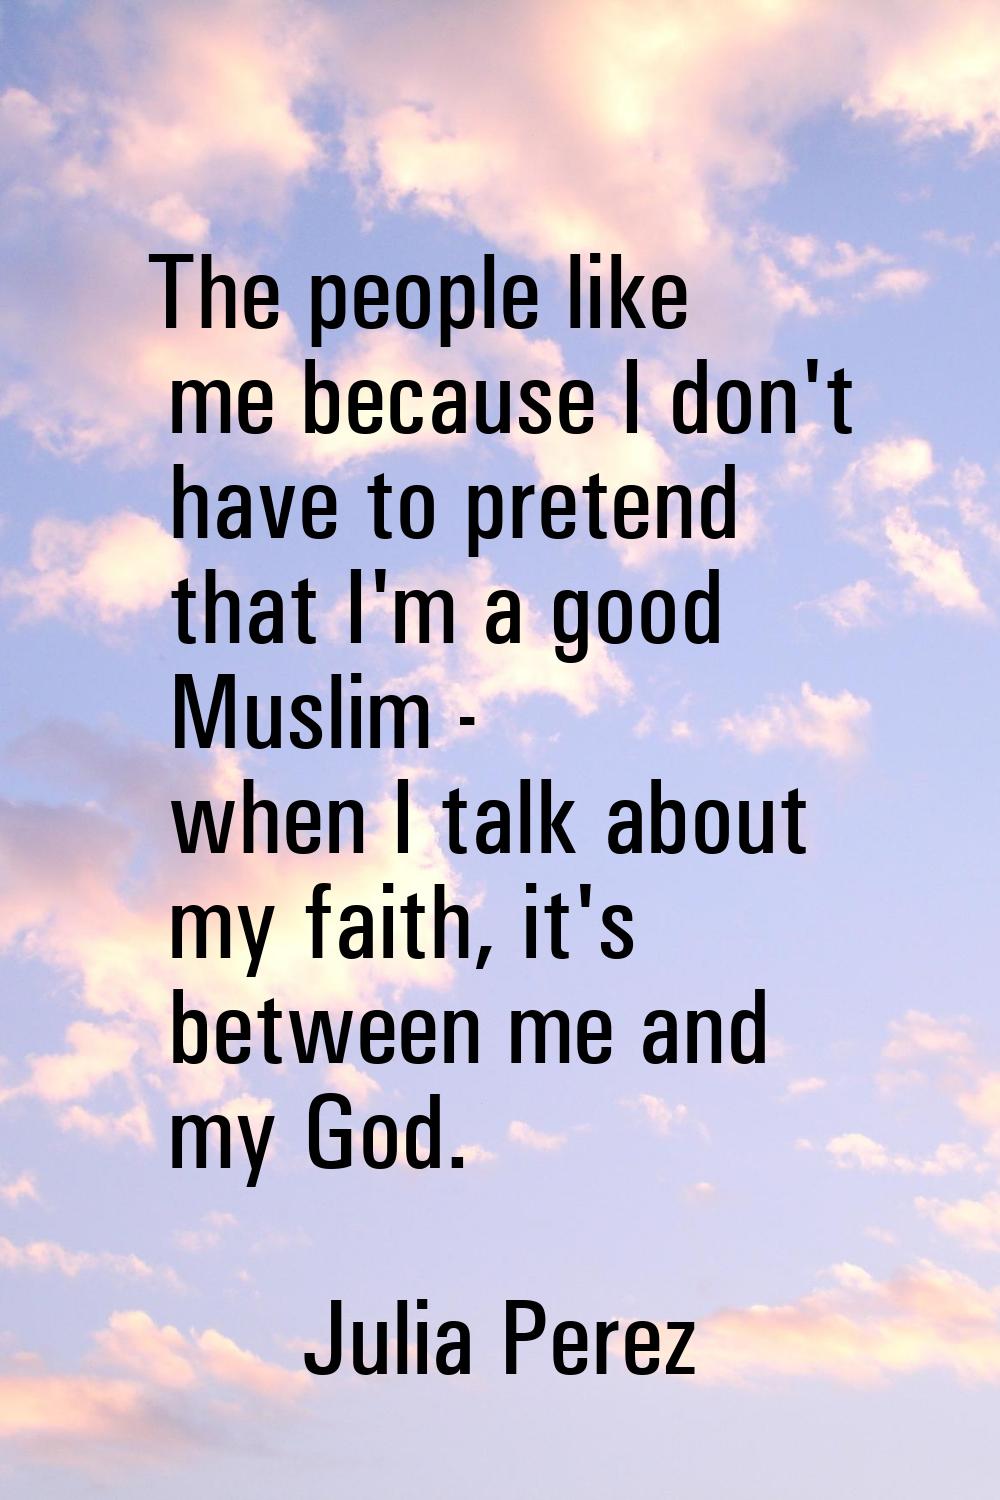 The people like me because I don't have to pretend that I'm a good Muslim - when I talk about my fa